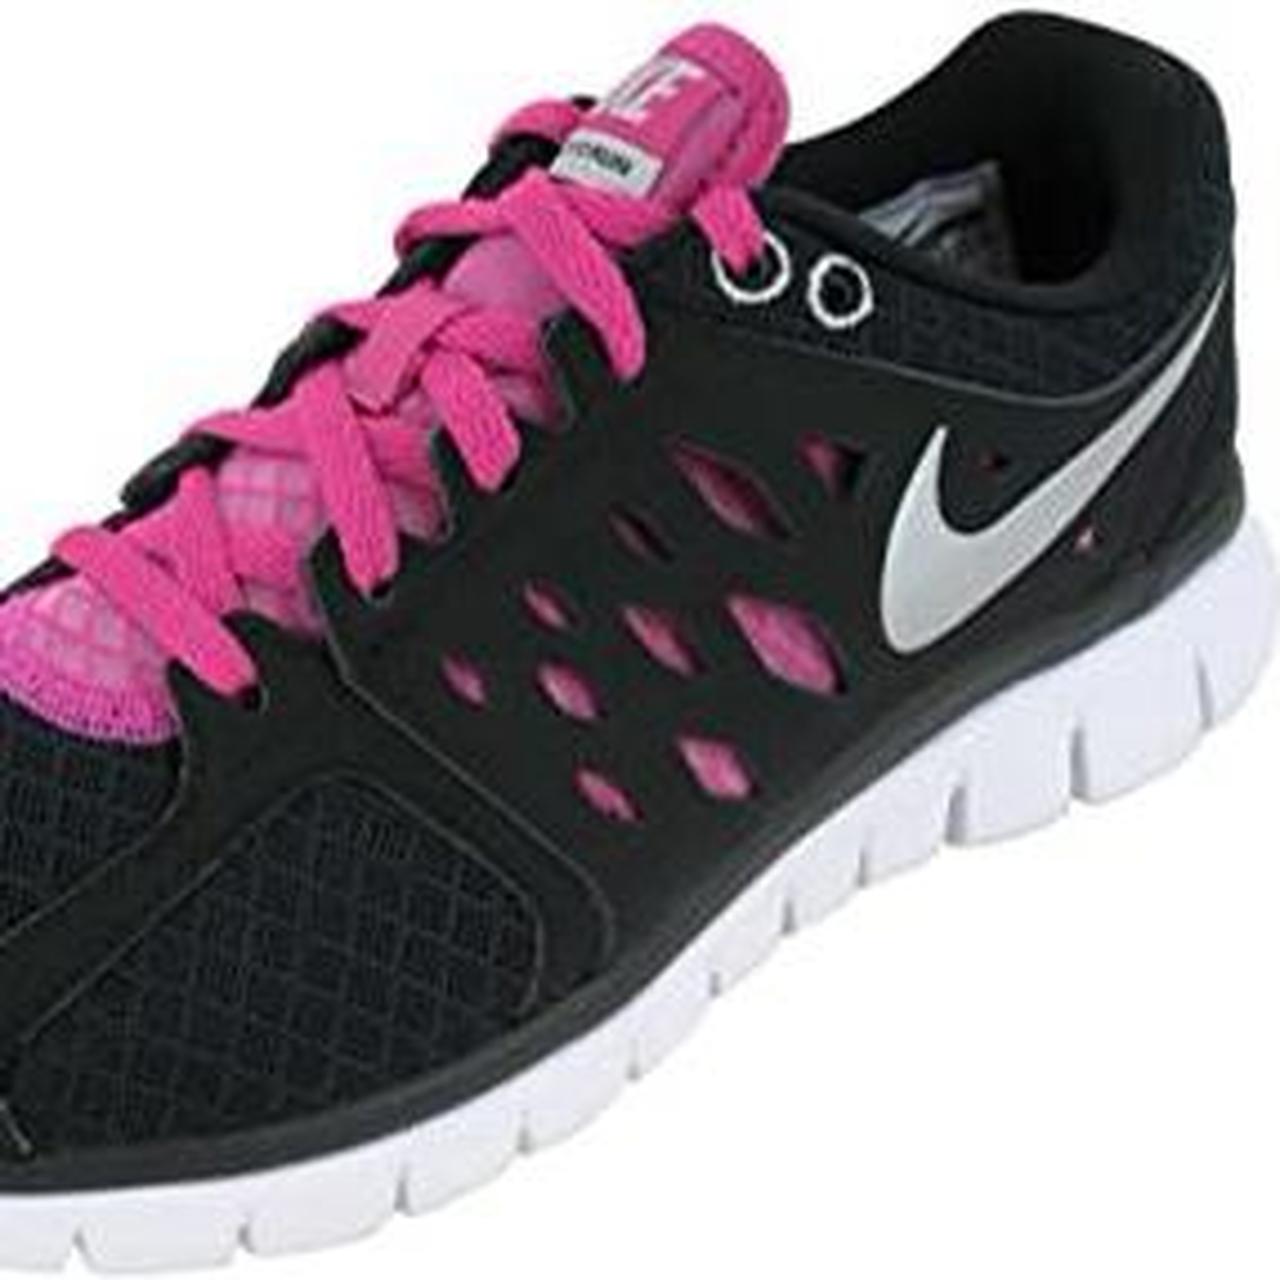 Product Image 2 - Pink & Black Nike Runners